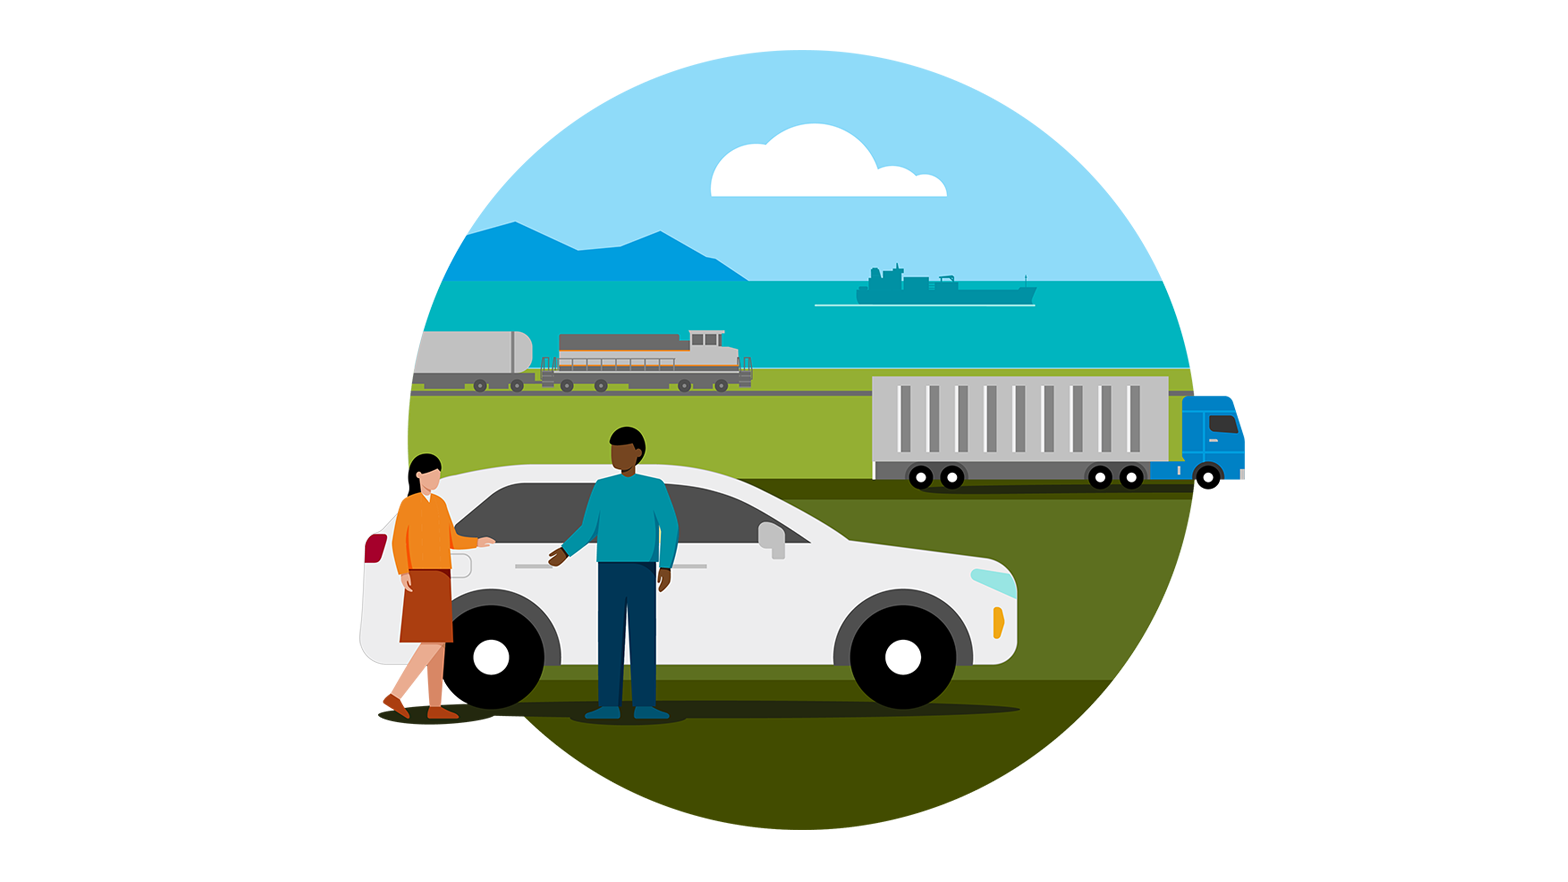 Illustration of people, car, truck, train and ship